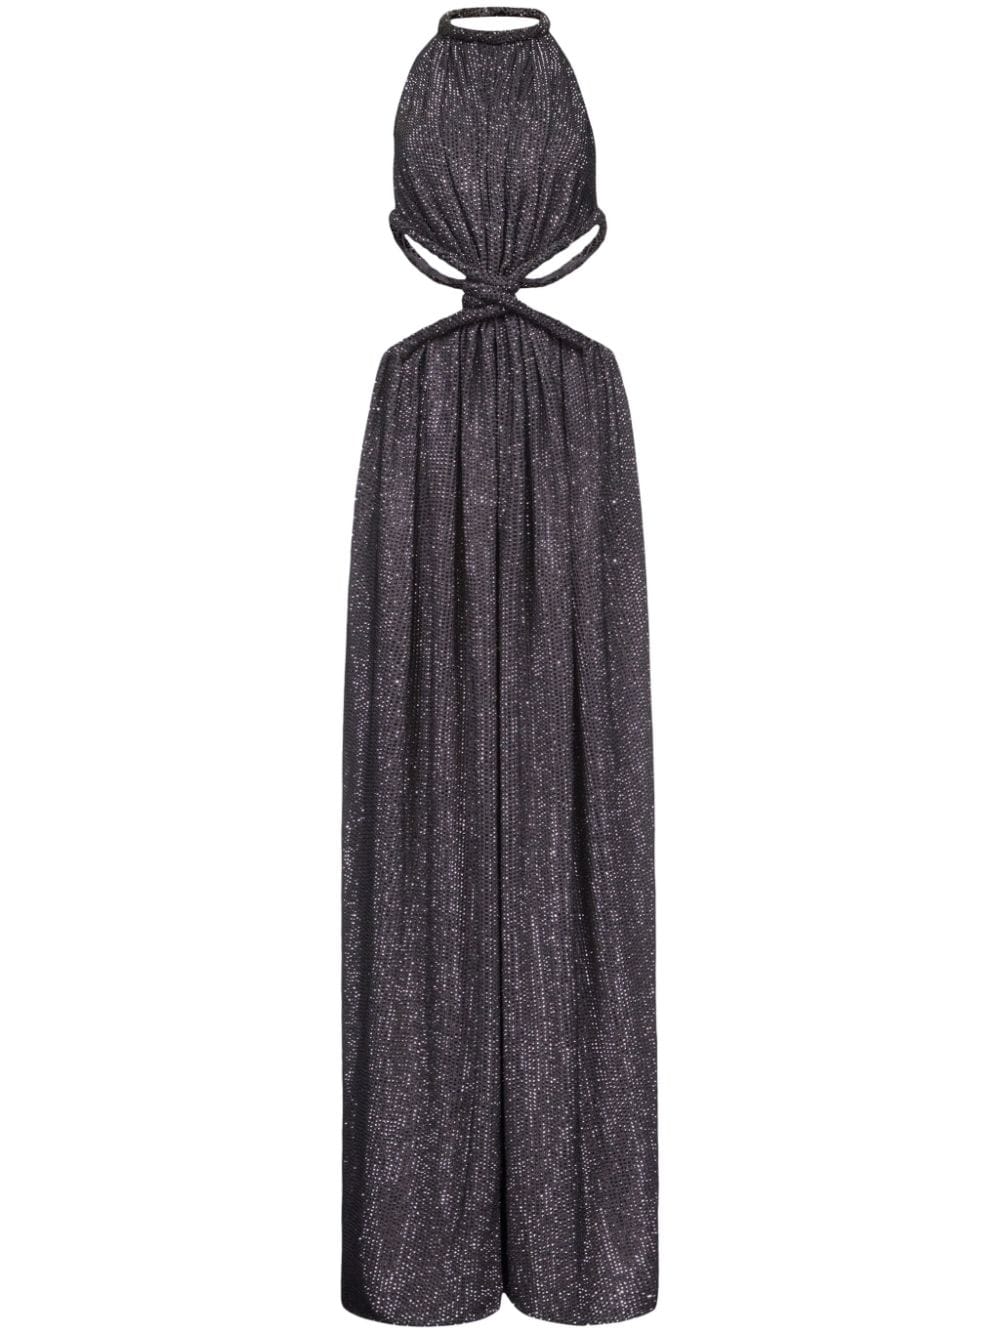 AREA crystal-embellished knot gown - Grey von AREA